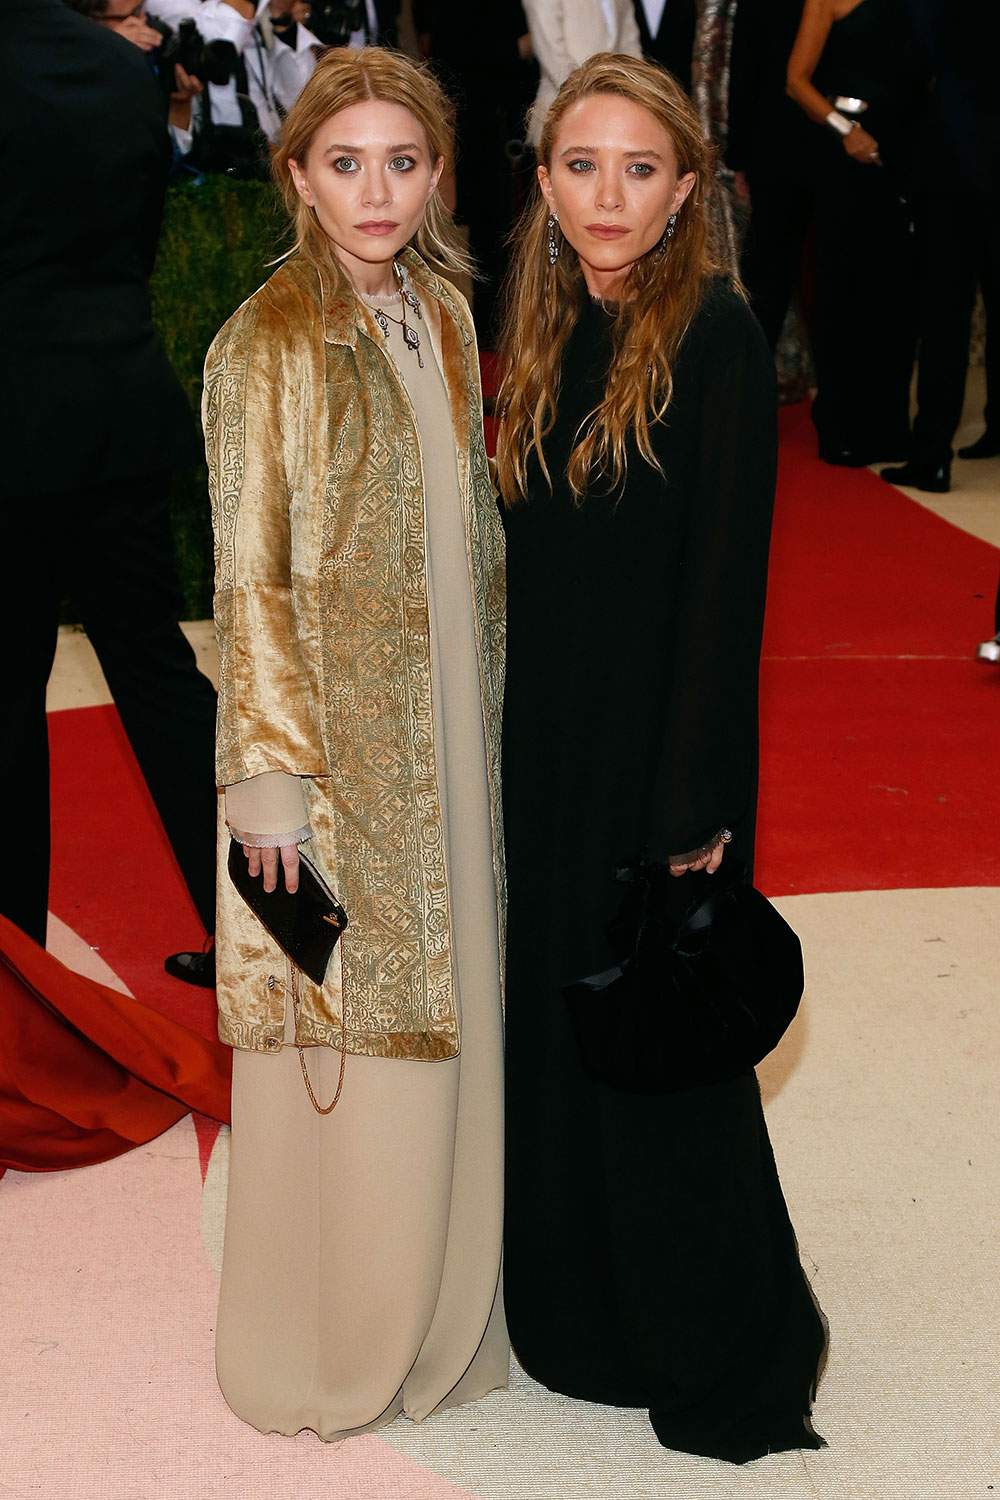 Mary-Kate and Ashley Olsen at the 2016 Metropolitan Museum of Art Costume Institute Gala